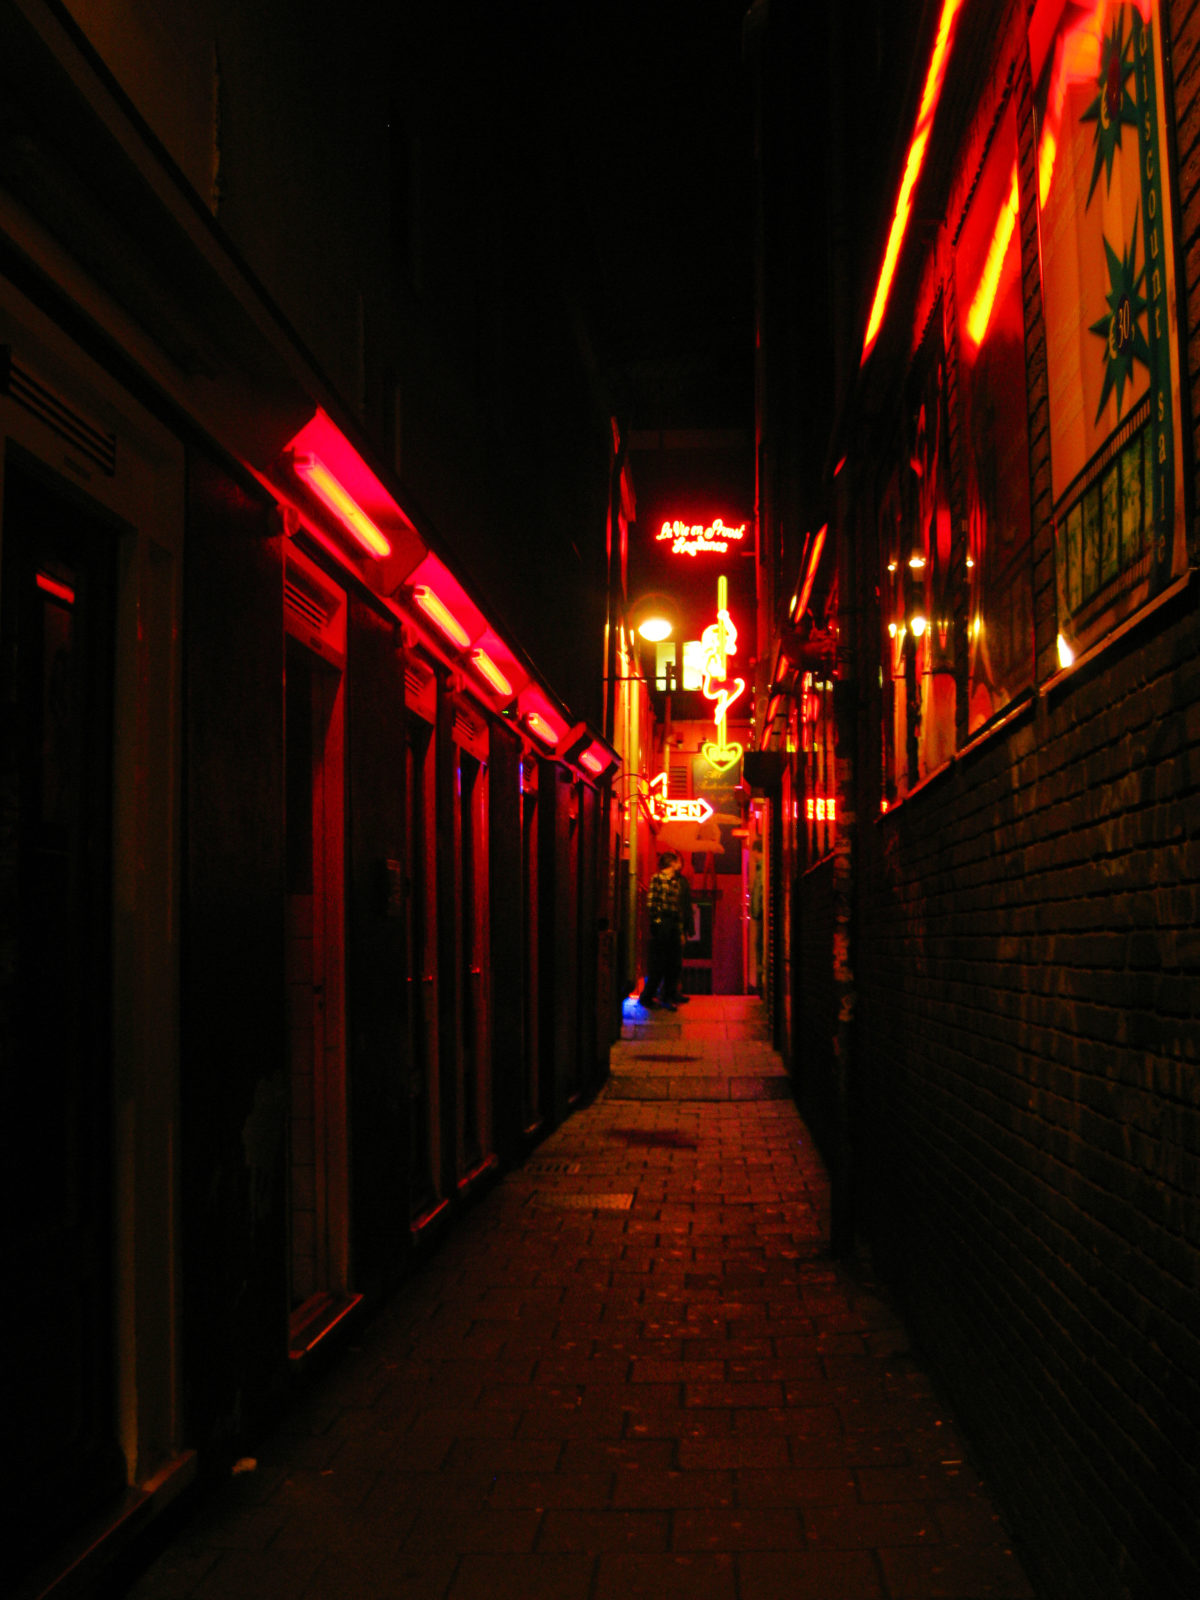 Walk through the Red-light district of Amsterdam